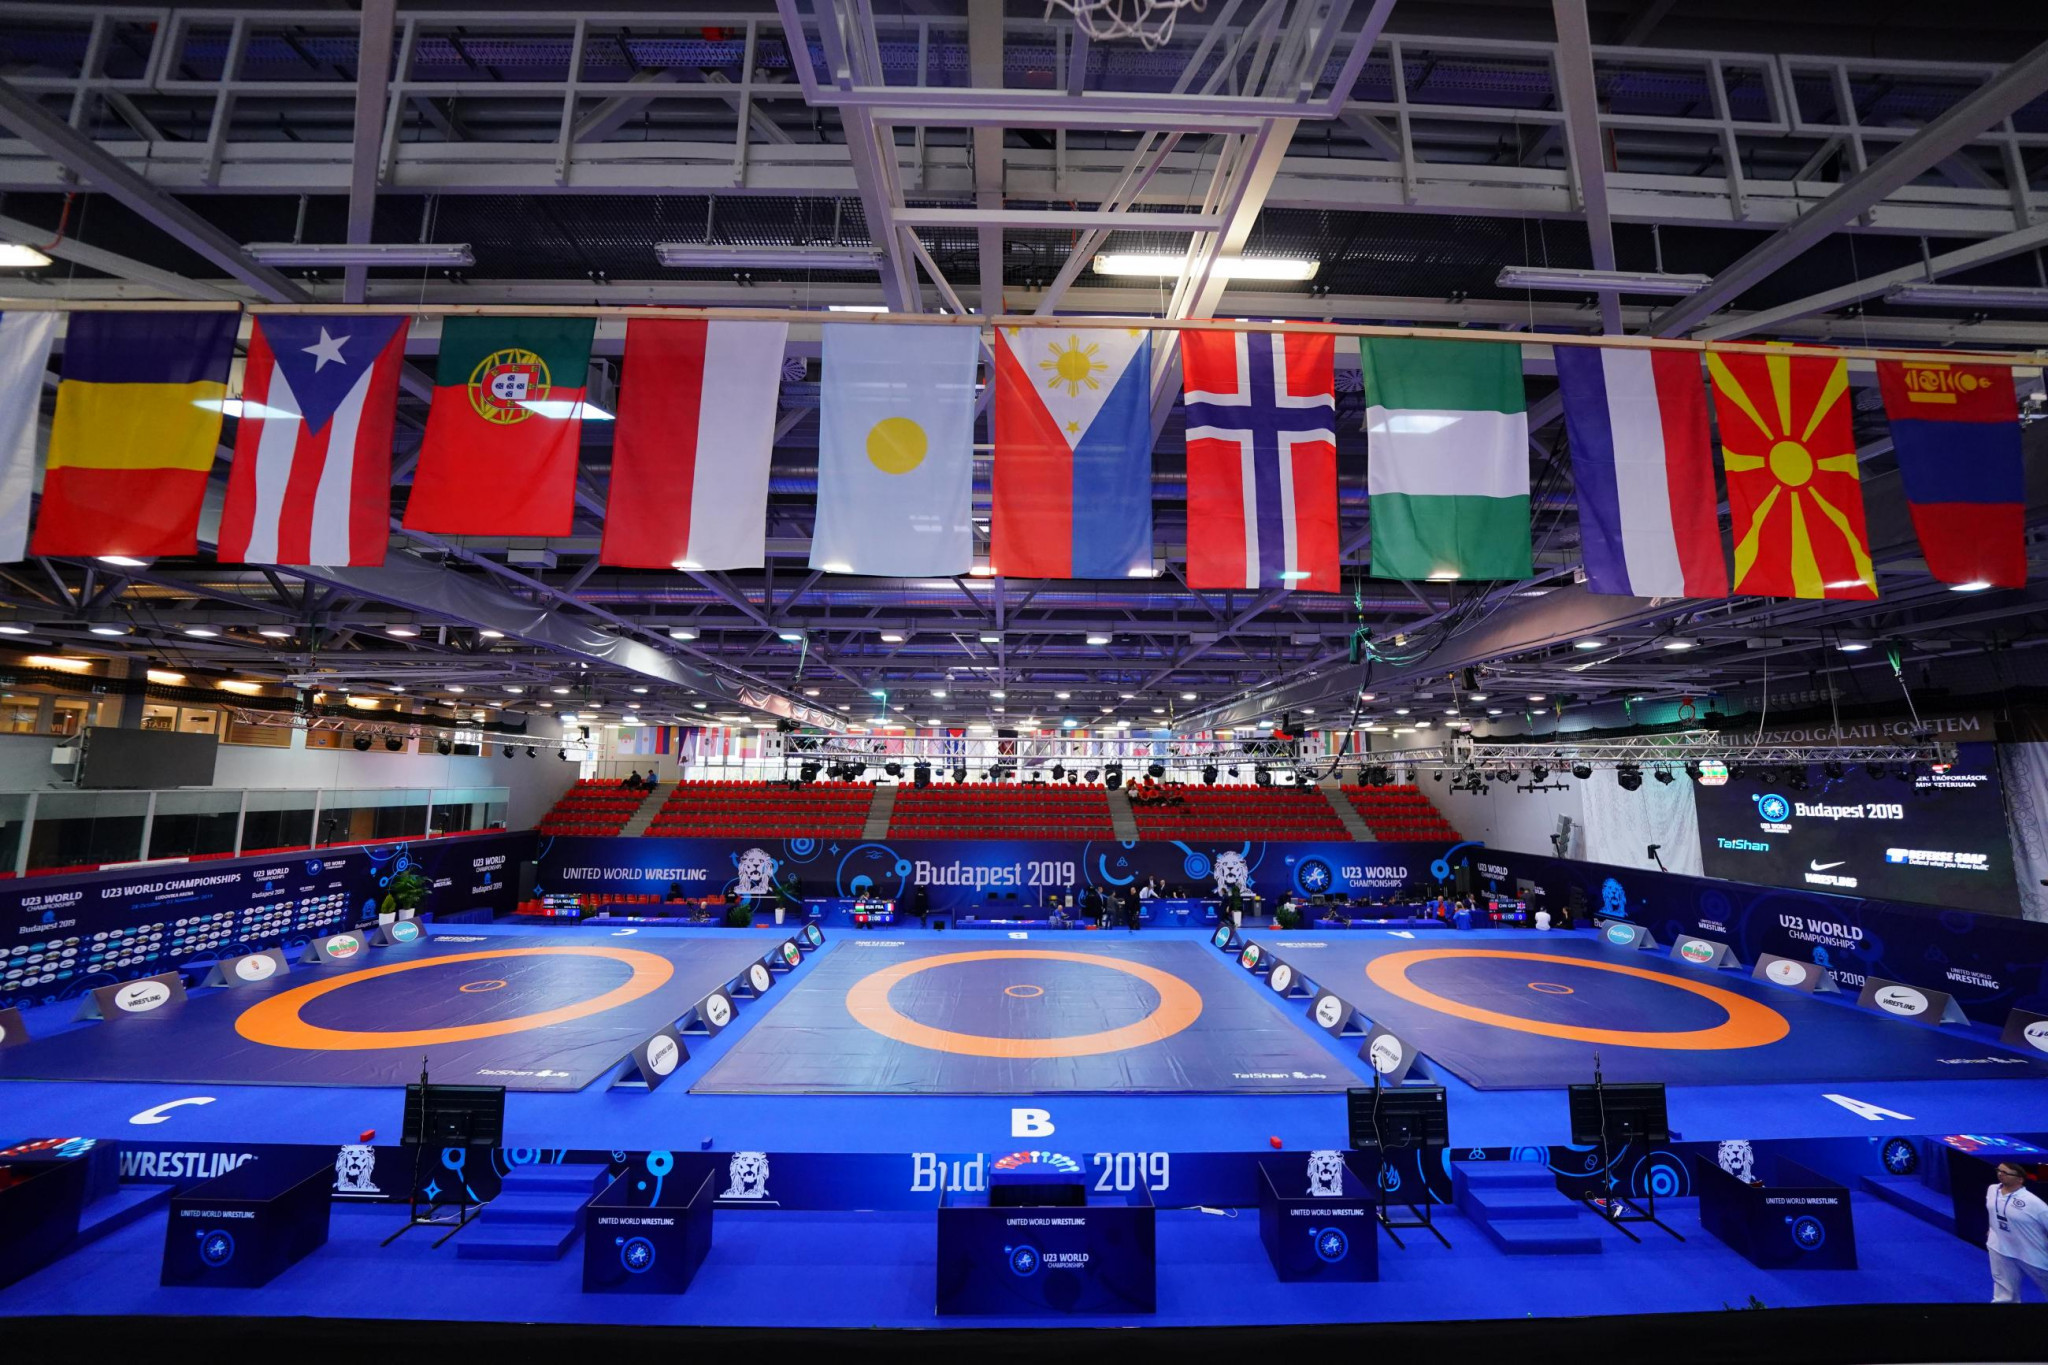 Budapest was due to host the European Olympic wrestling qualifier next week ©UWW